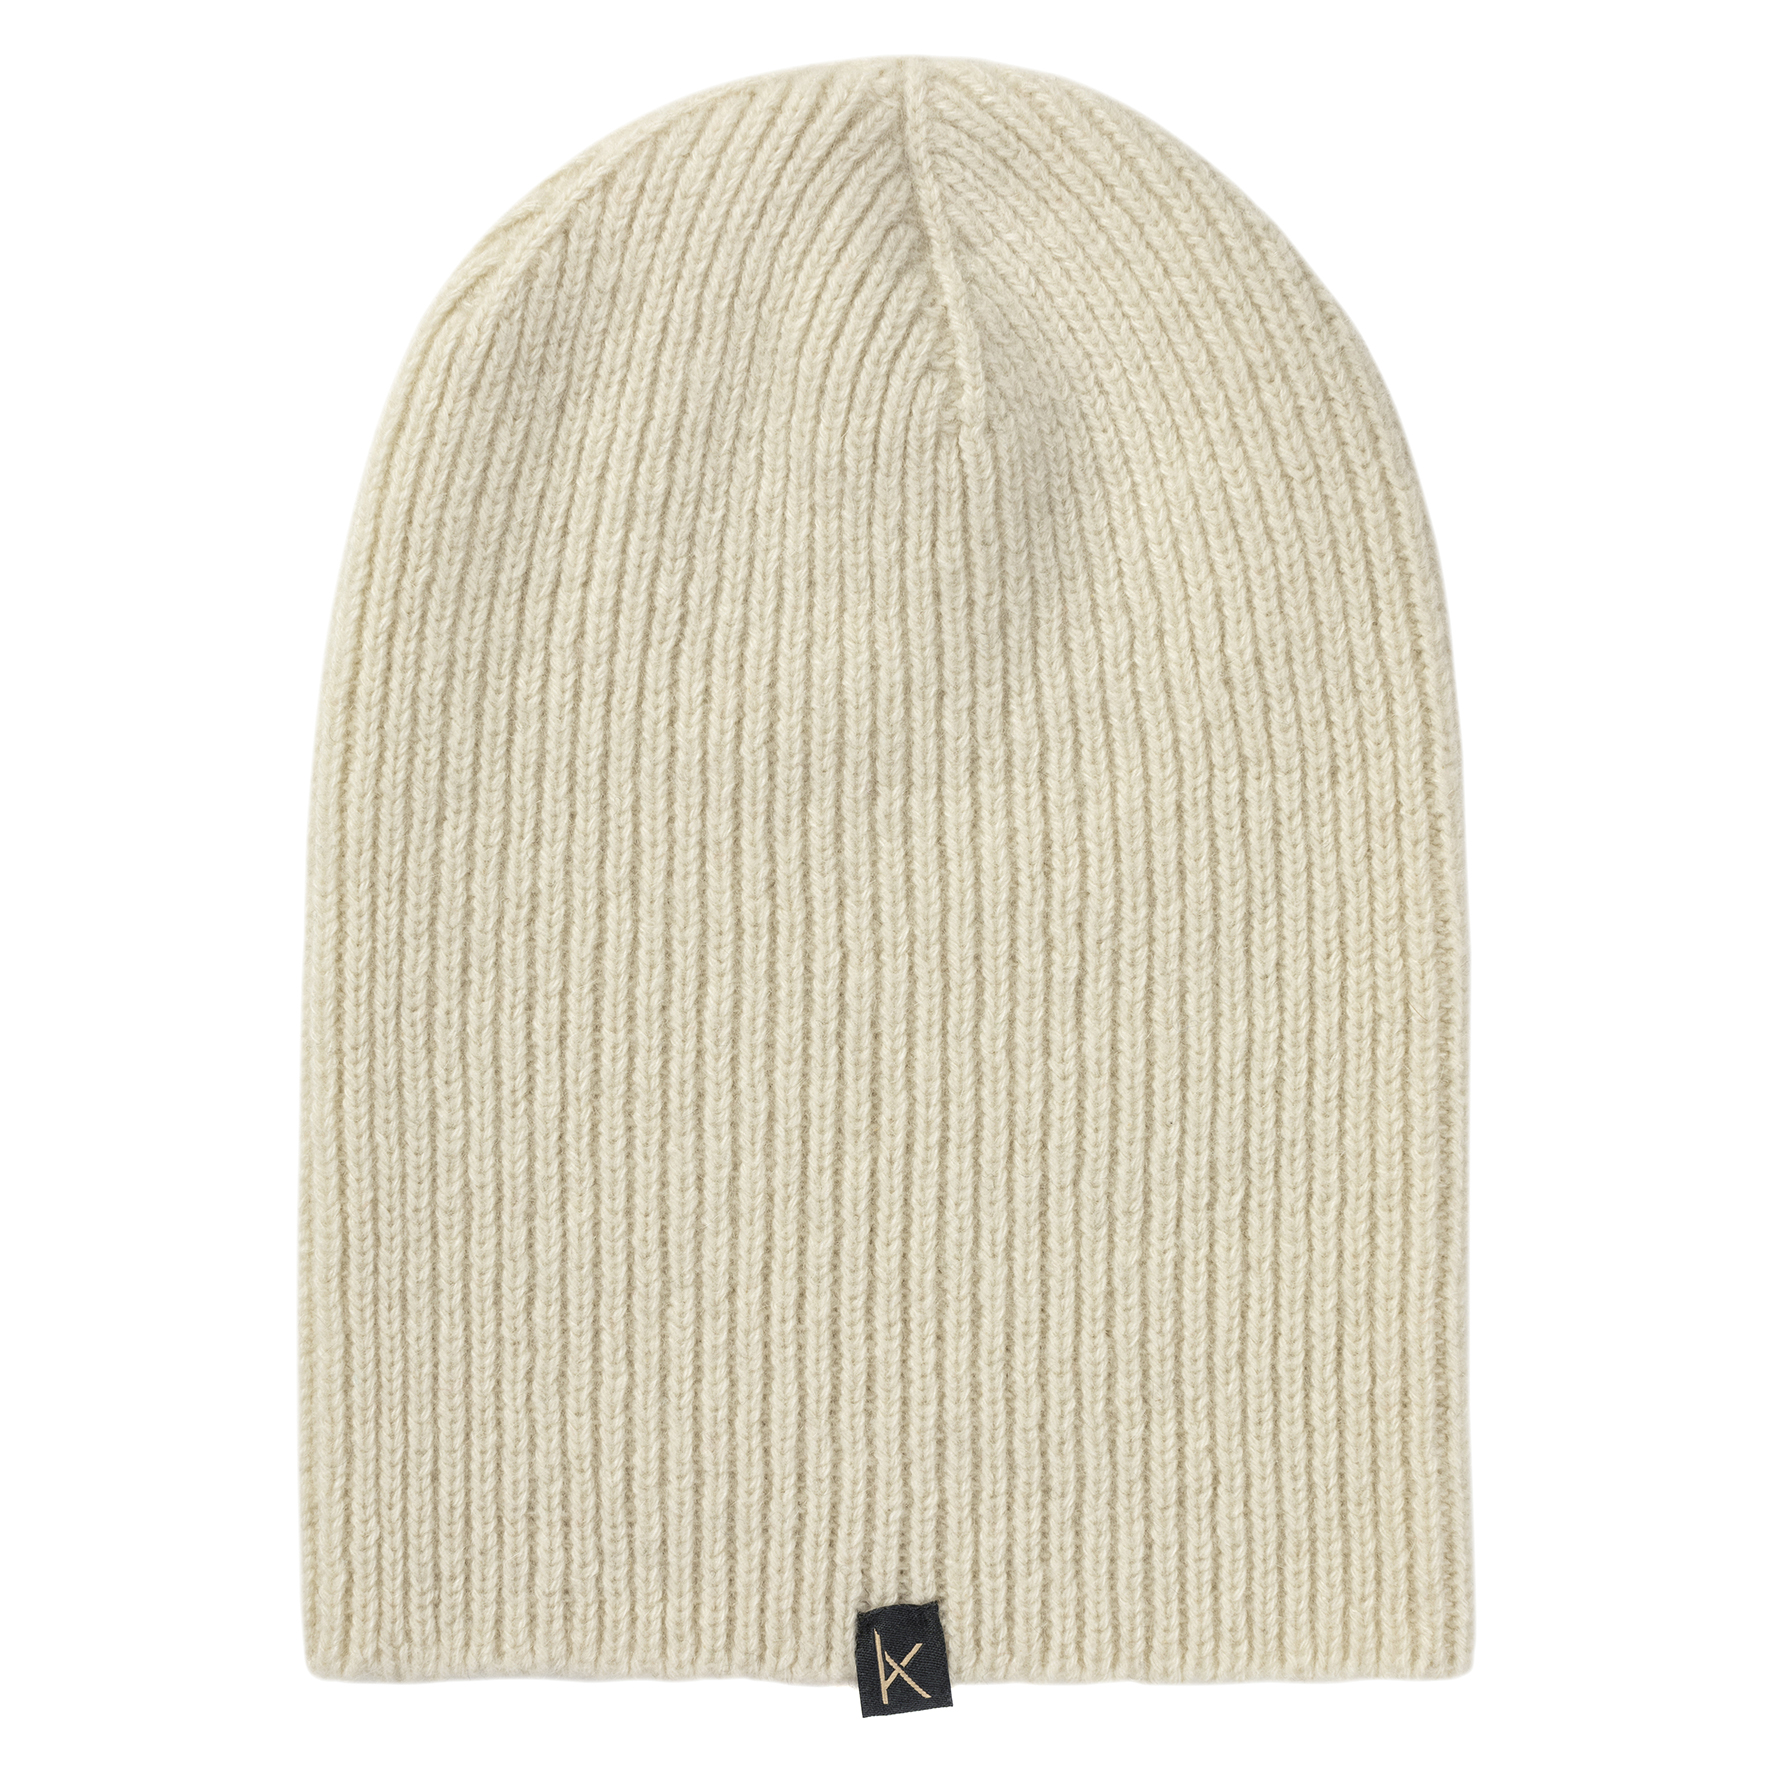 White Deluxe Knitted Cashmere Beanie Hat